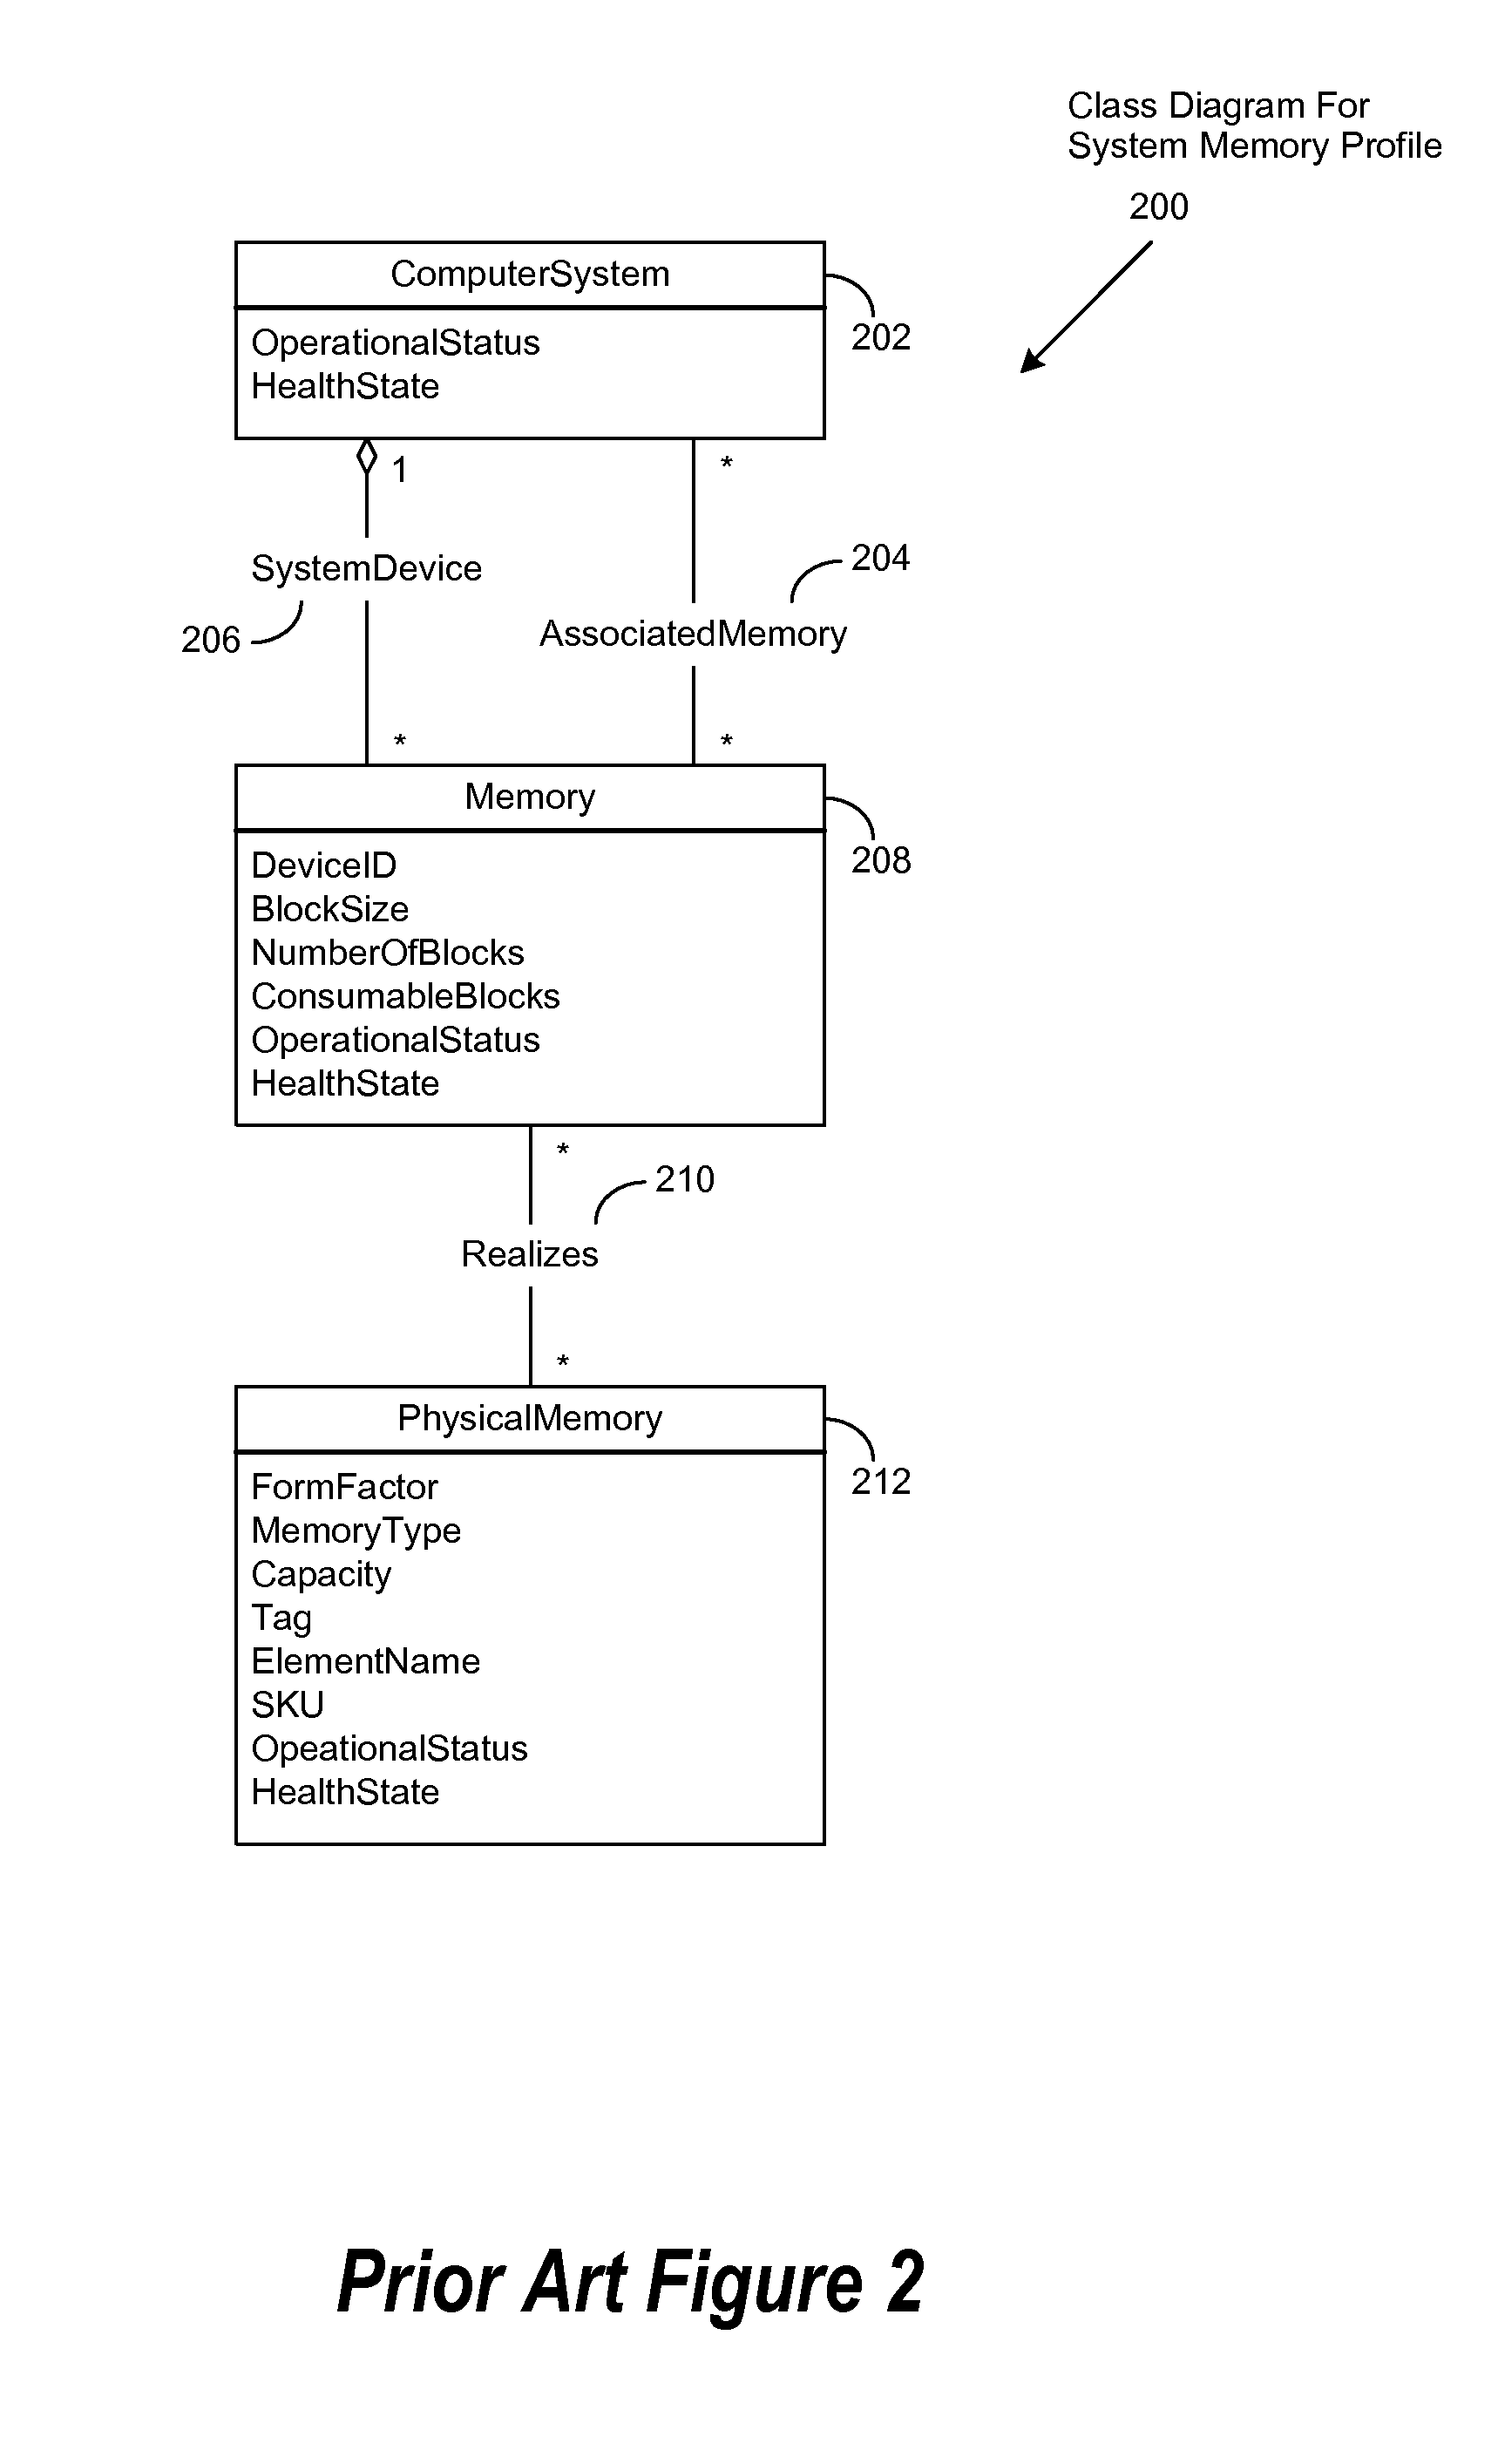 Method to support dynamic object extensions for common information model (CIM) operation and maintenance